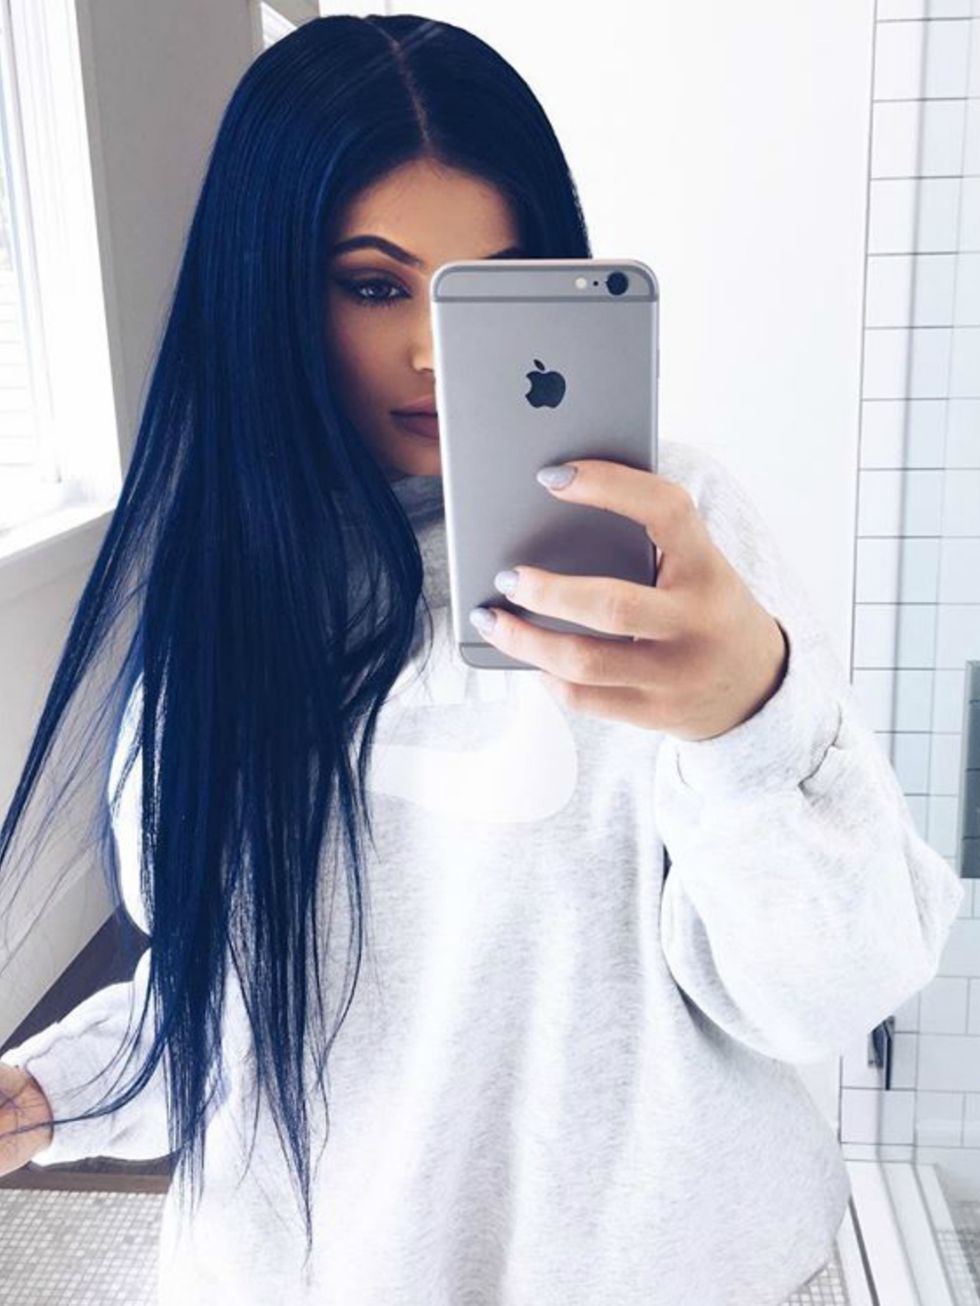 Finger, Hairstyle, Sleeve, White, Mobile phone, Beauty, Selfie, Long hair, Portable communications device, Black hair, 